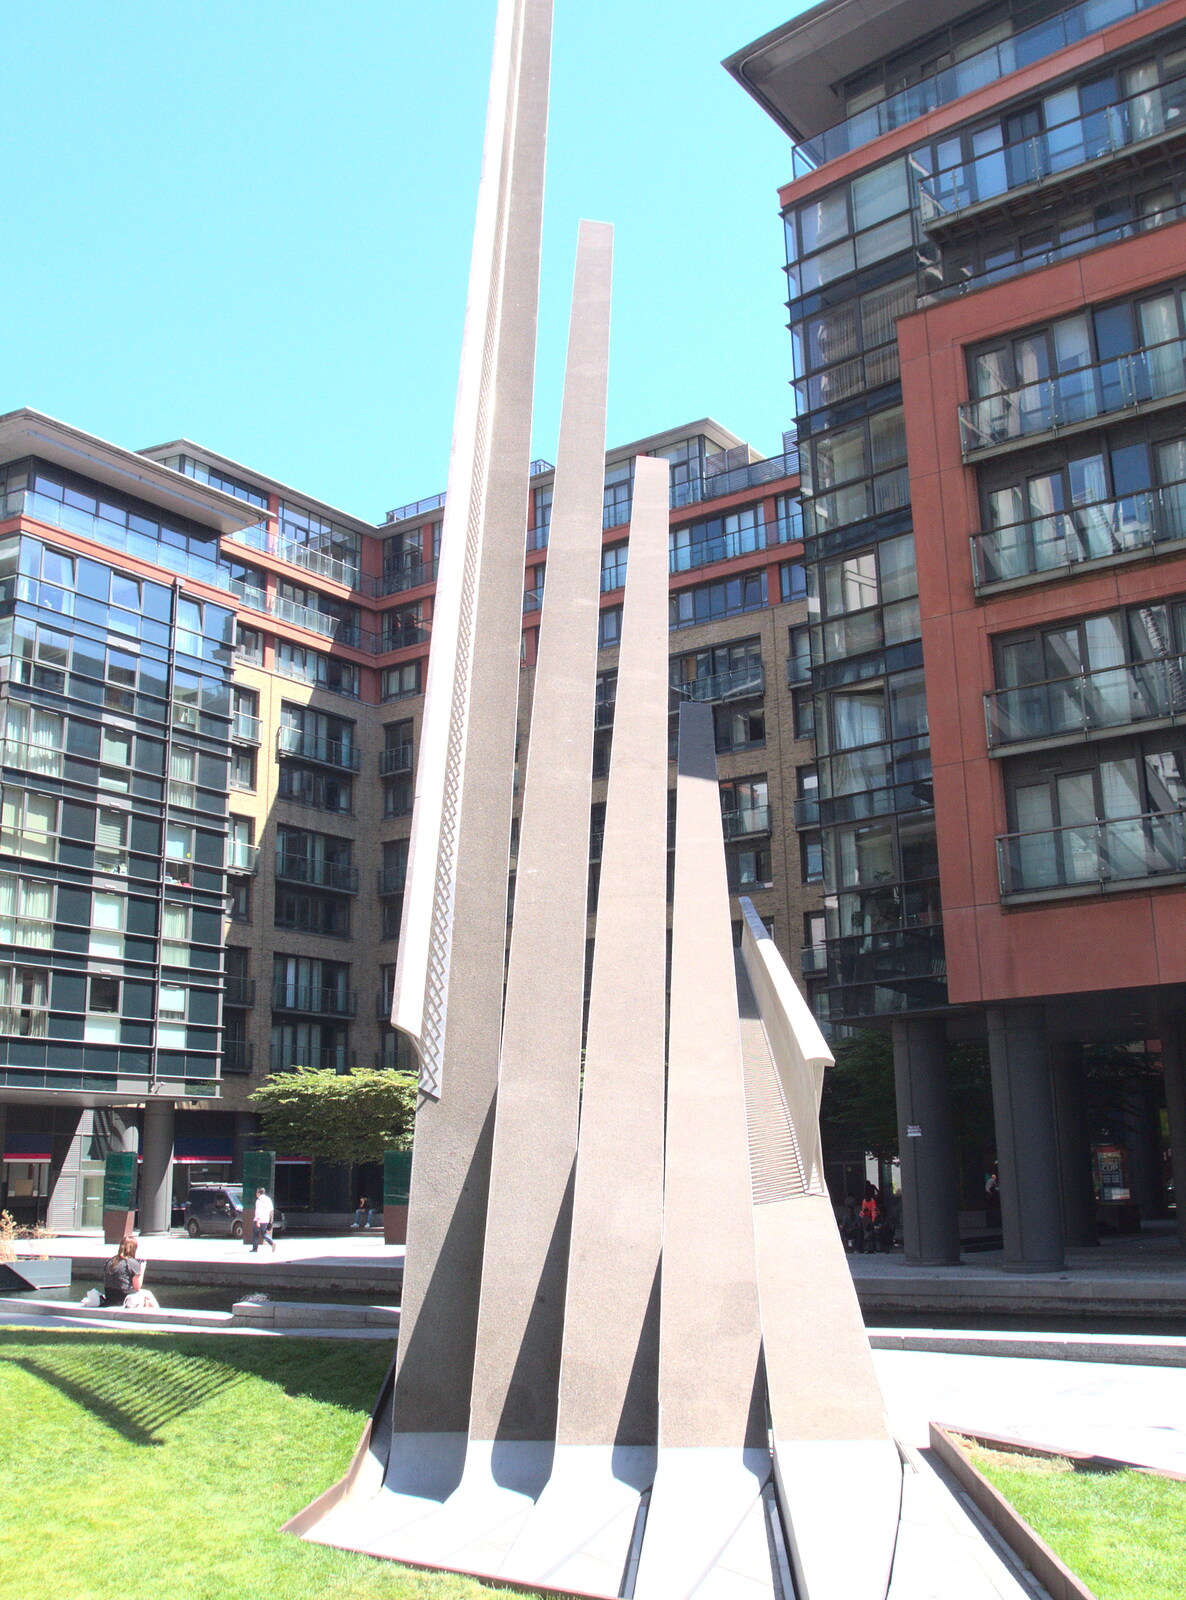 A bridge that turns into a sculpture from A SwiftKey Lunch, Porchester Place,  Edgware Road, London - 27th June 2018